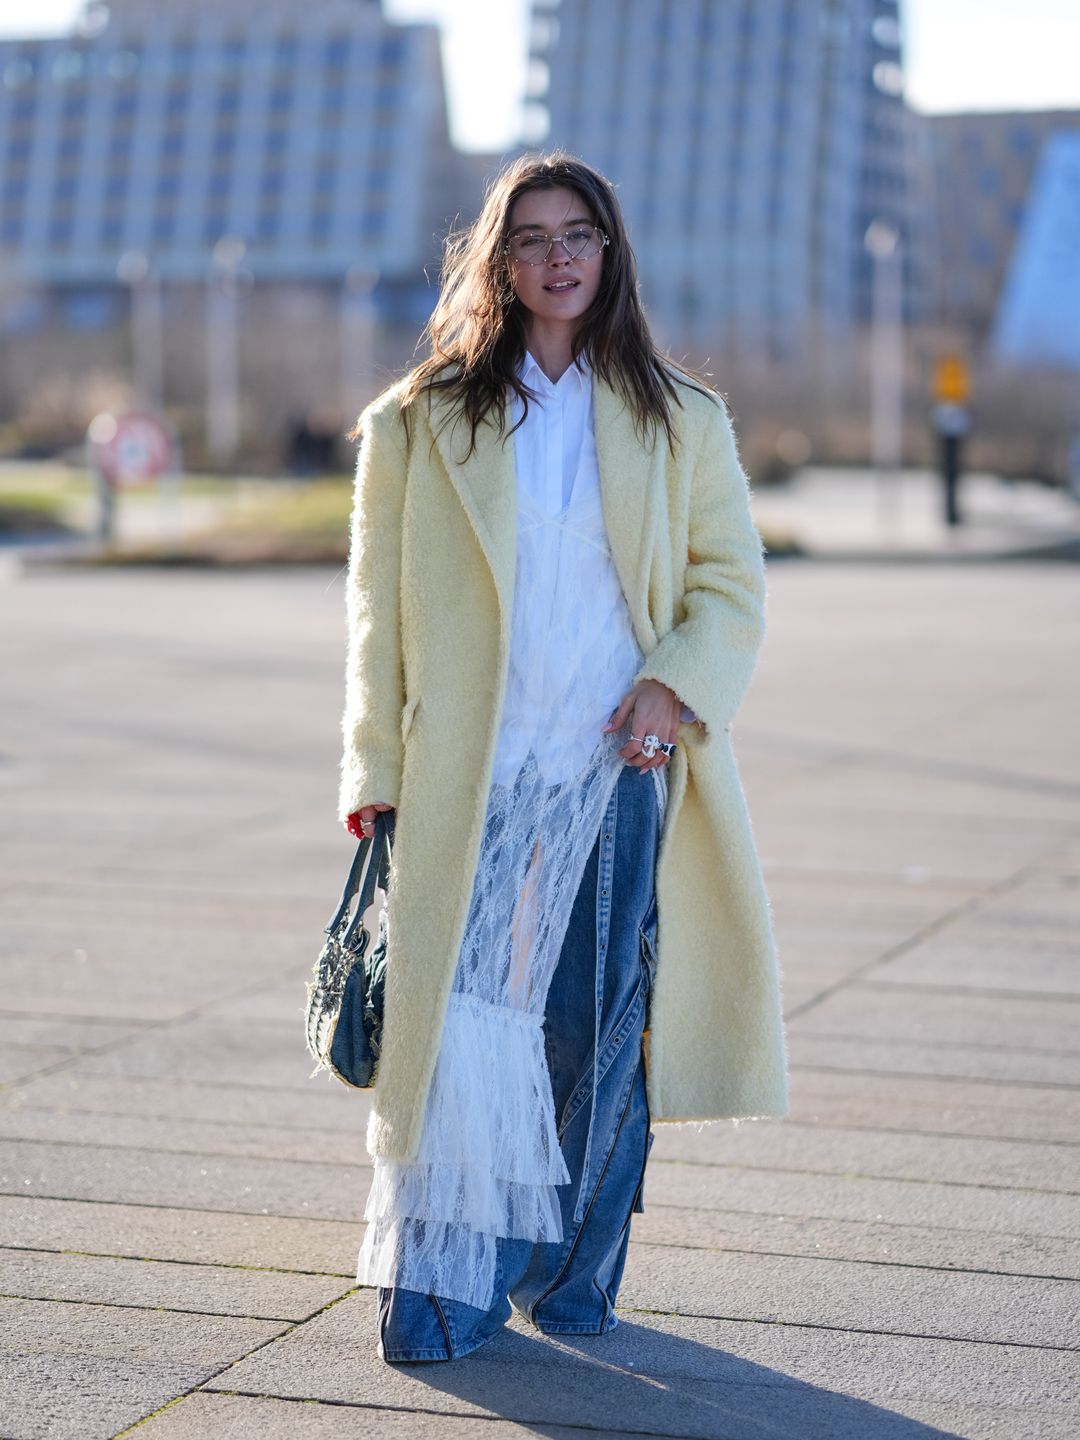 A Fashion Week guest wearing flares under a mesh dress 